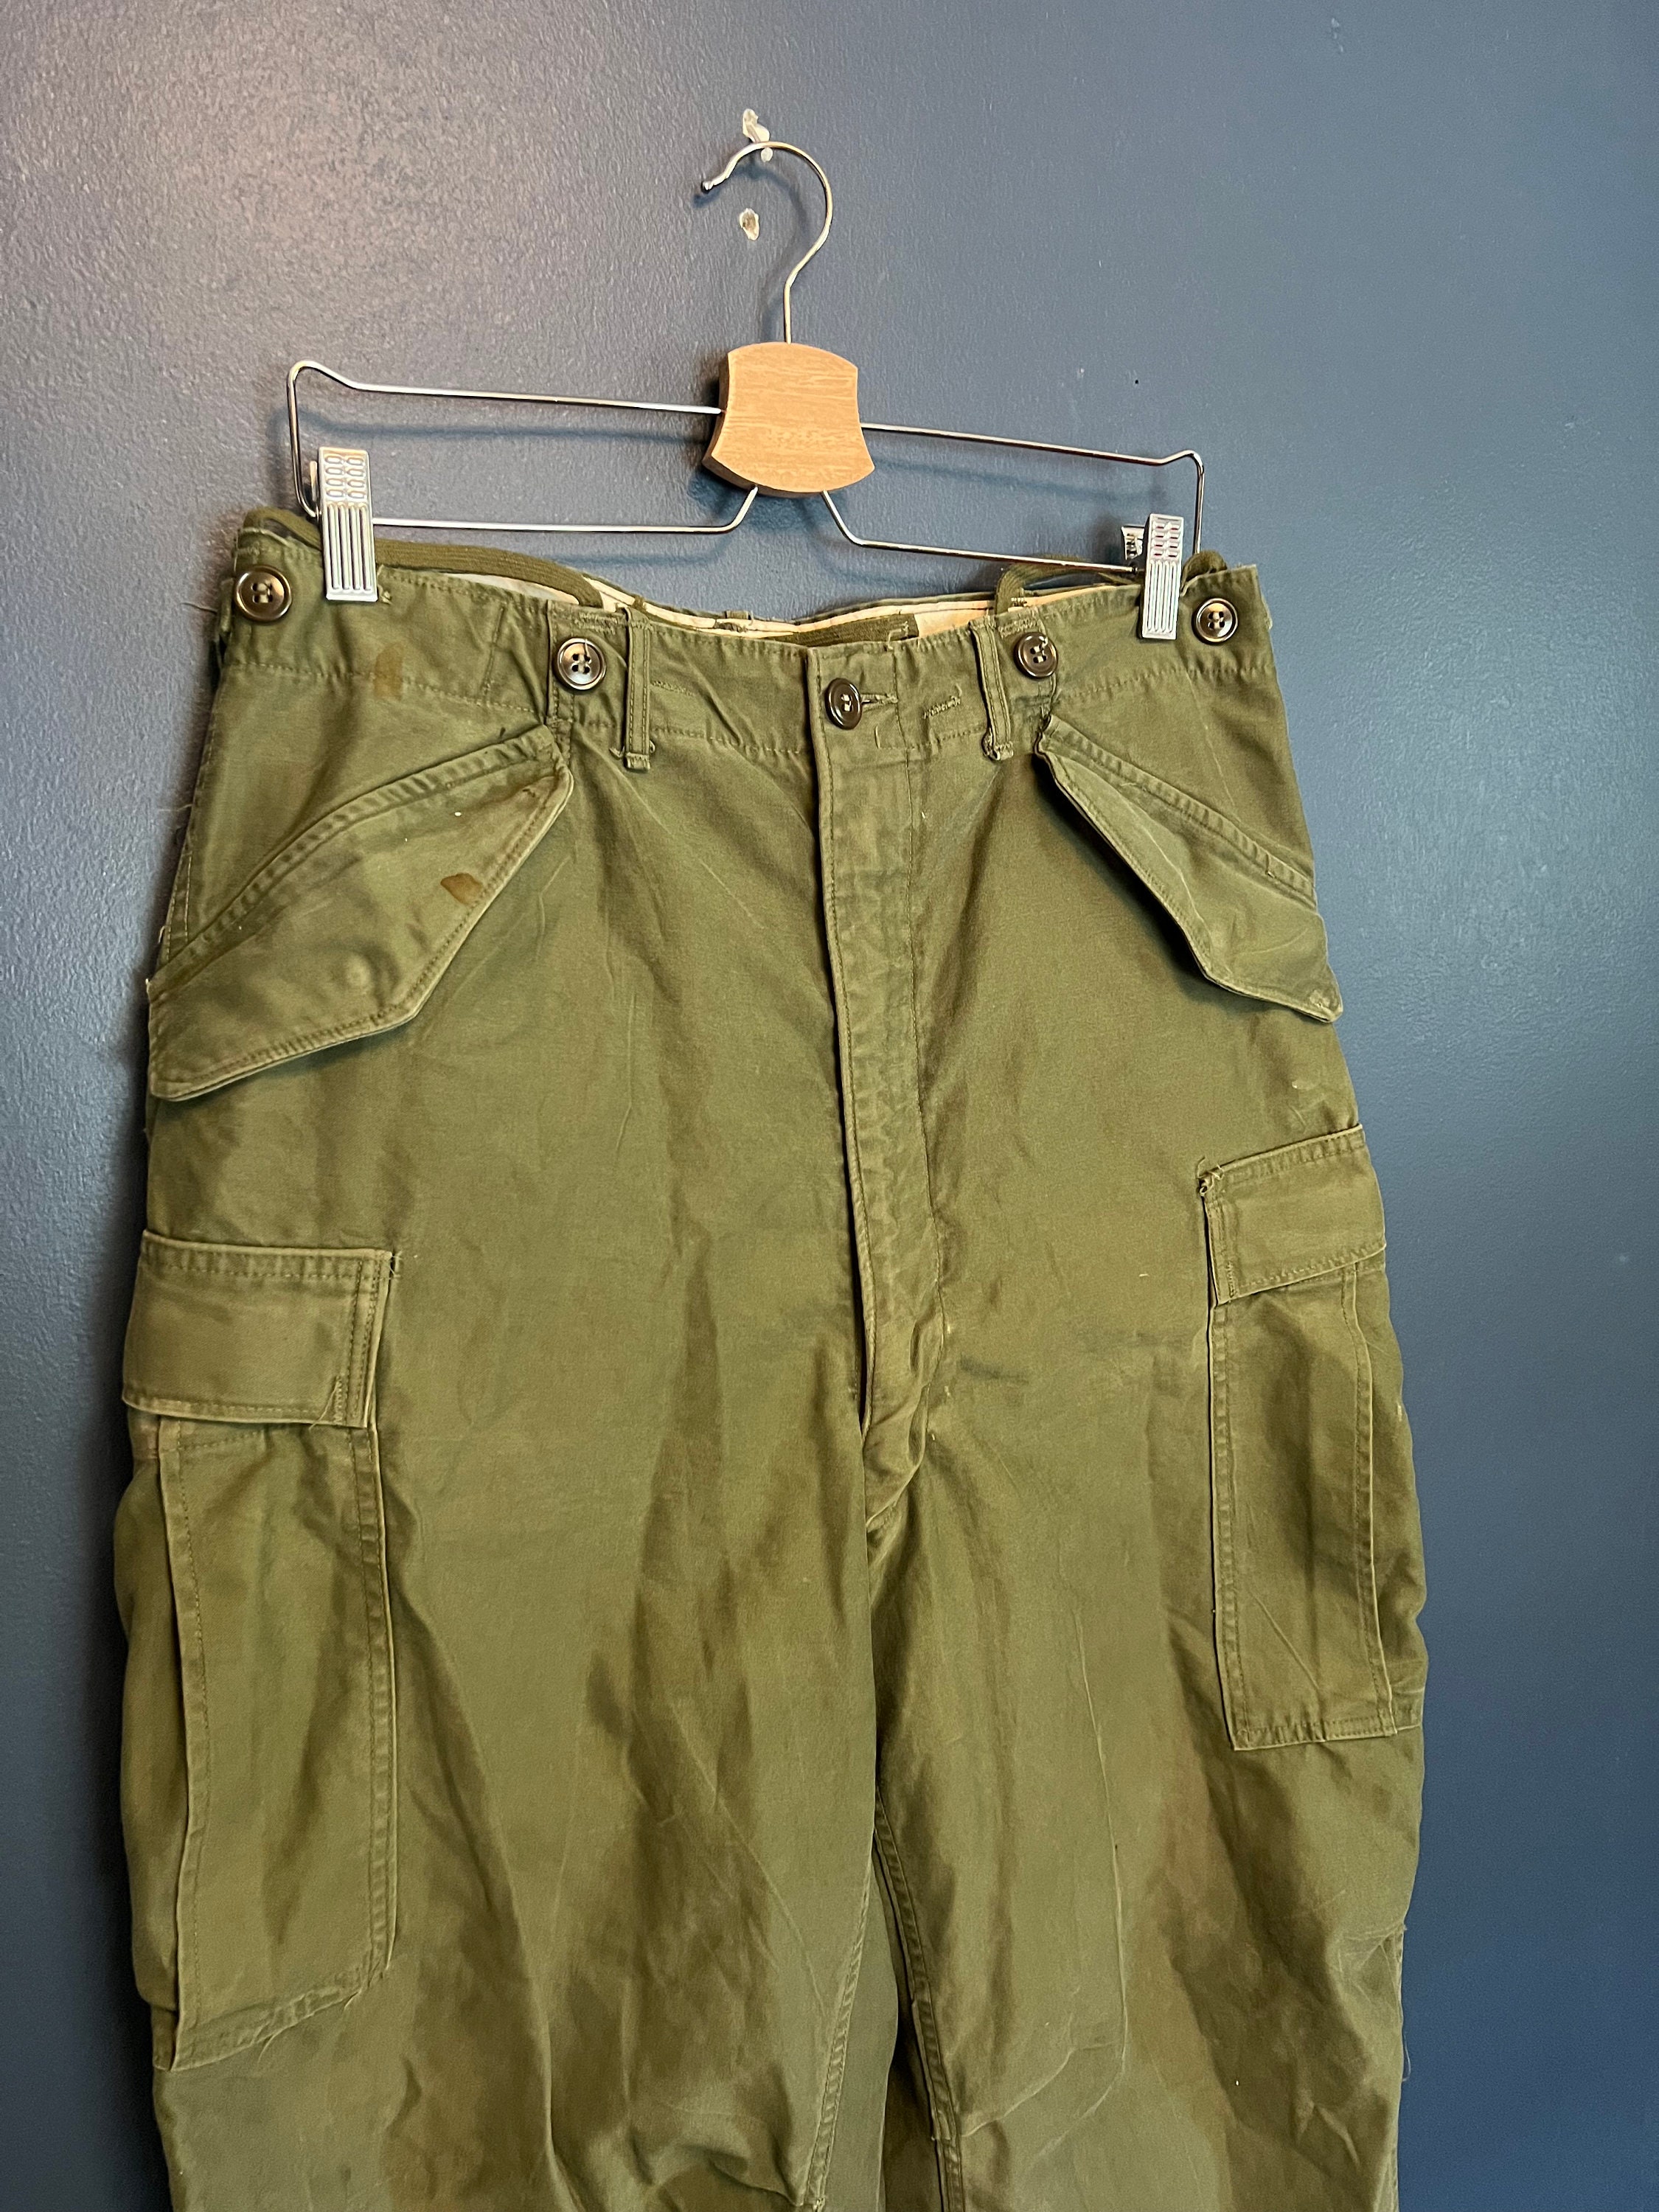 Military Pants  Cargoes and Pants Used by Military Personnel  Olive Planet